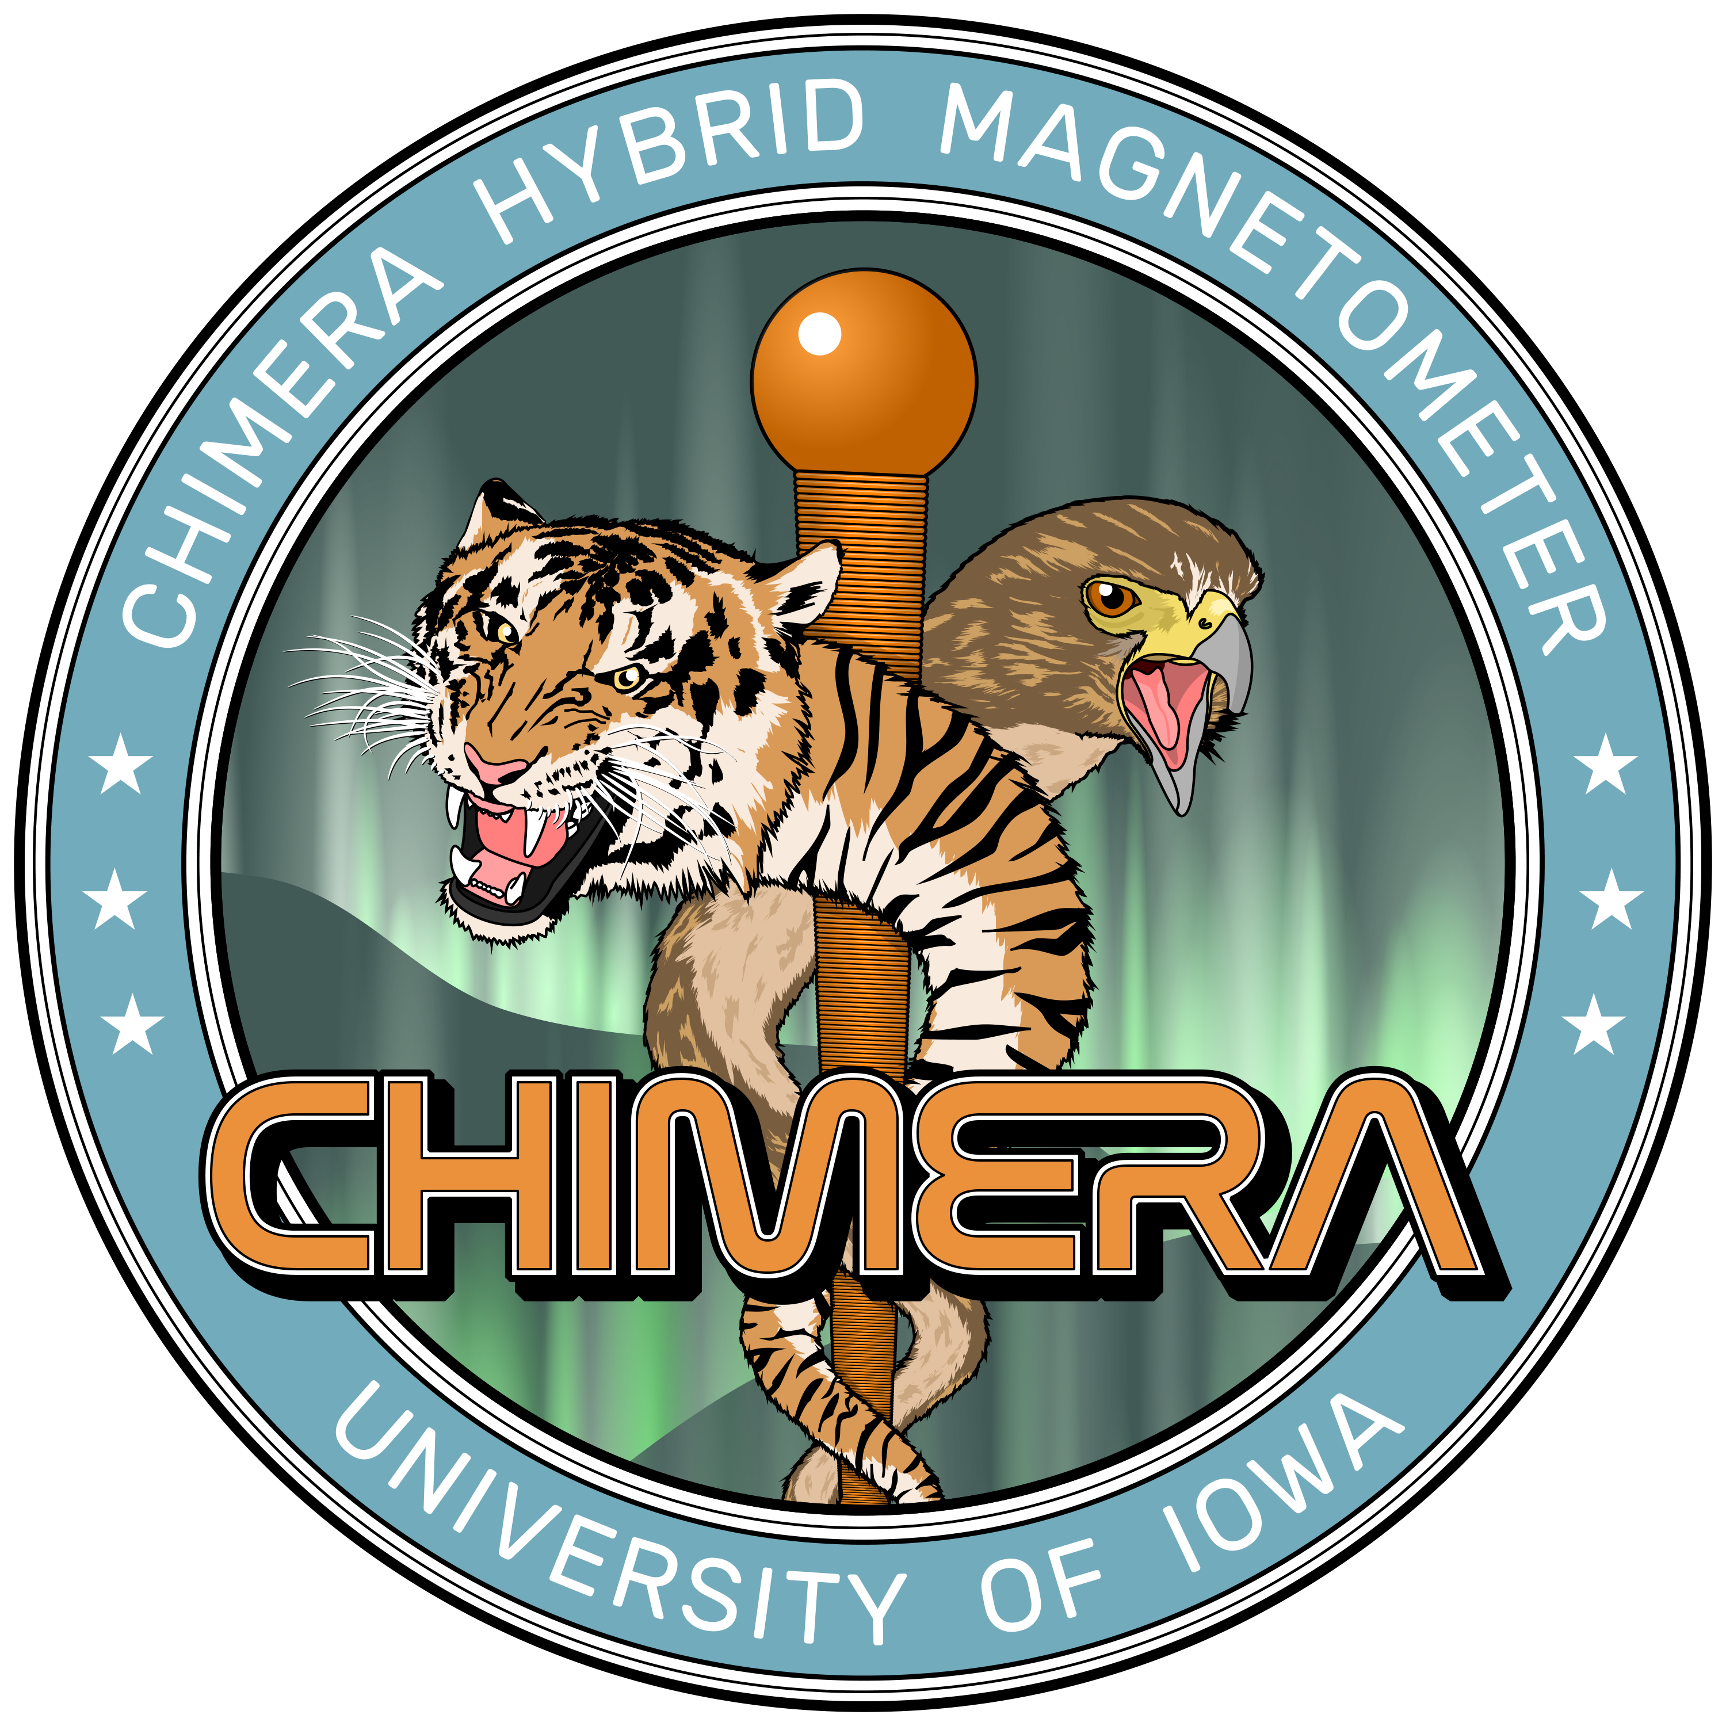 Chimera circular logo. Outside light blue ring reads Chimera Hybrid Magnetometer, University of Iowa. The center of the logo is a tiger and a hawk wrapped around a pole with the text